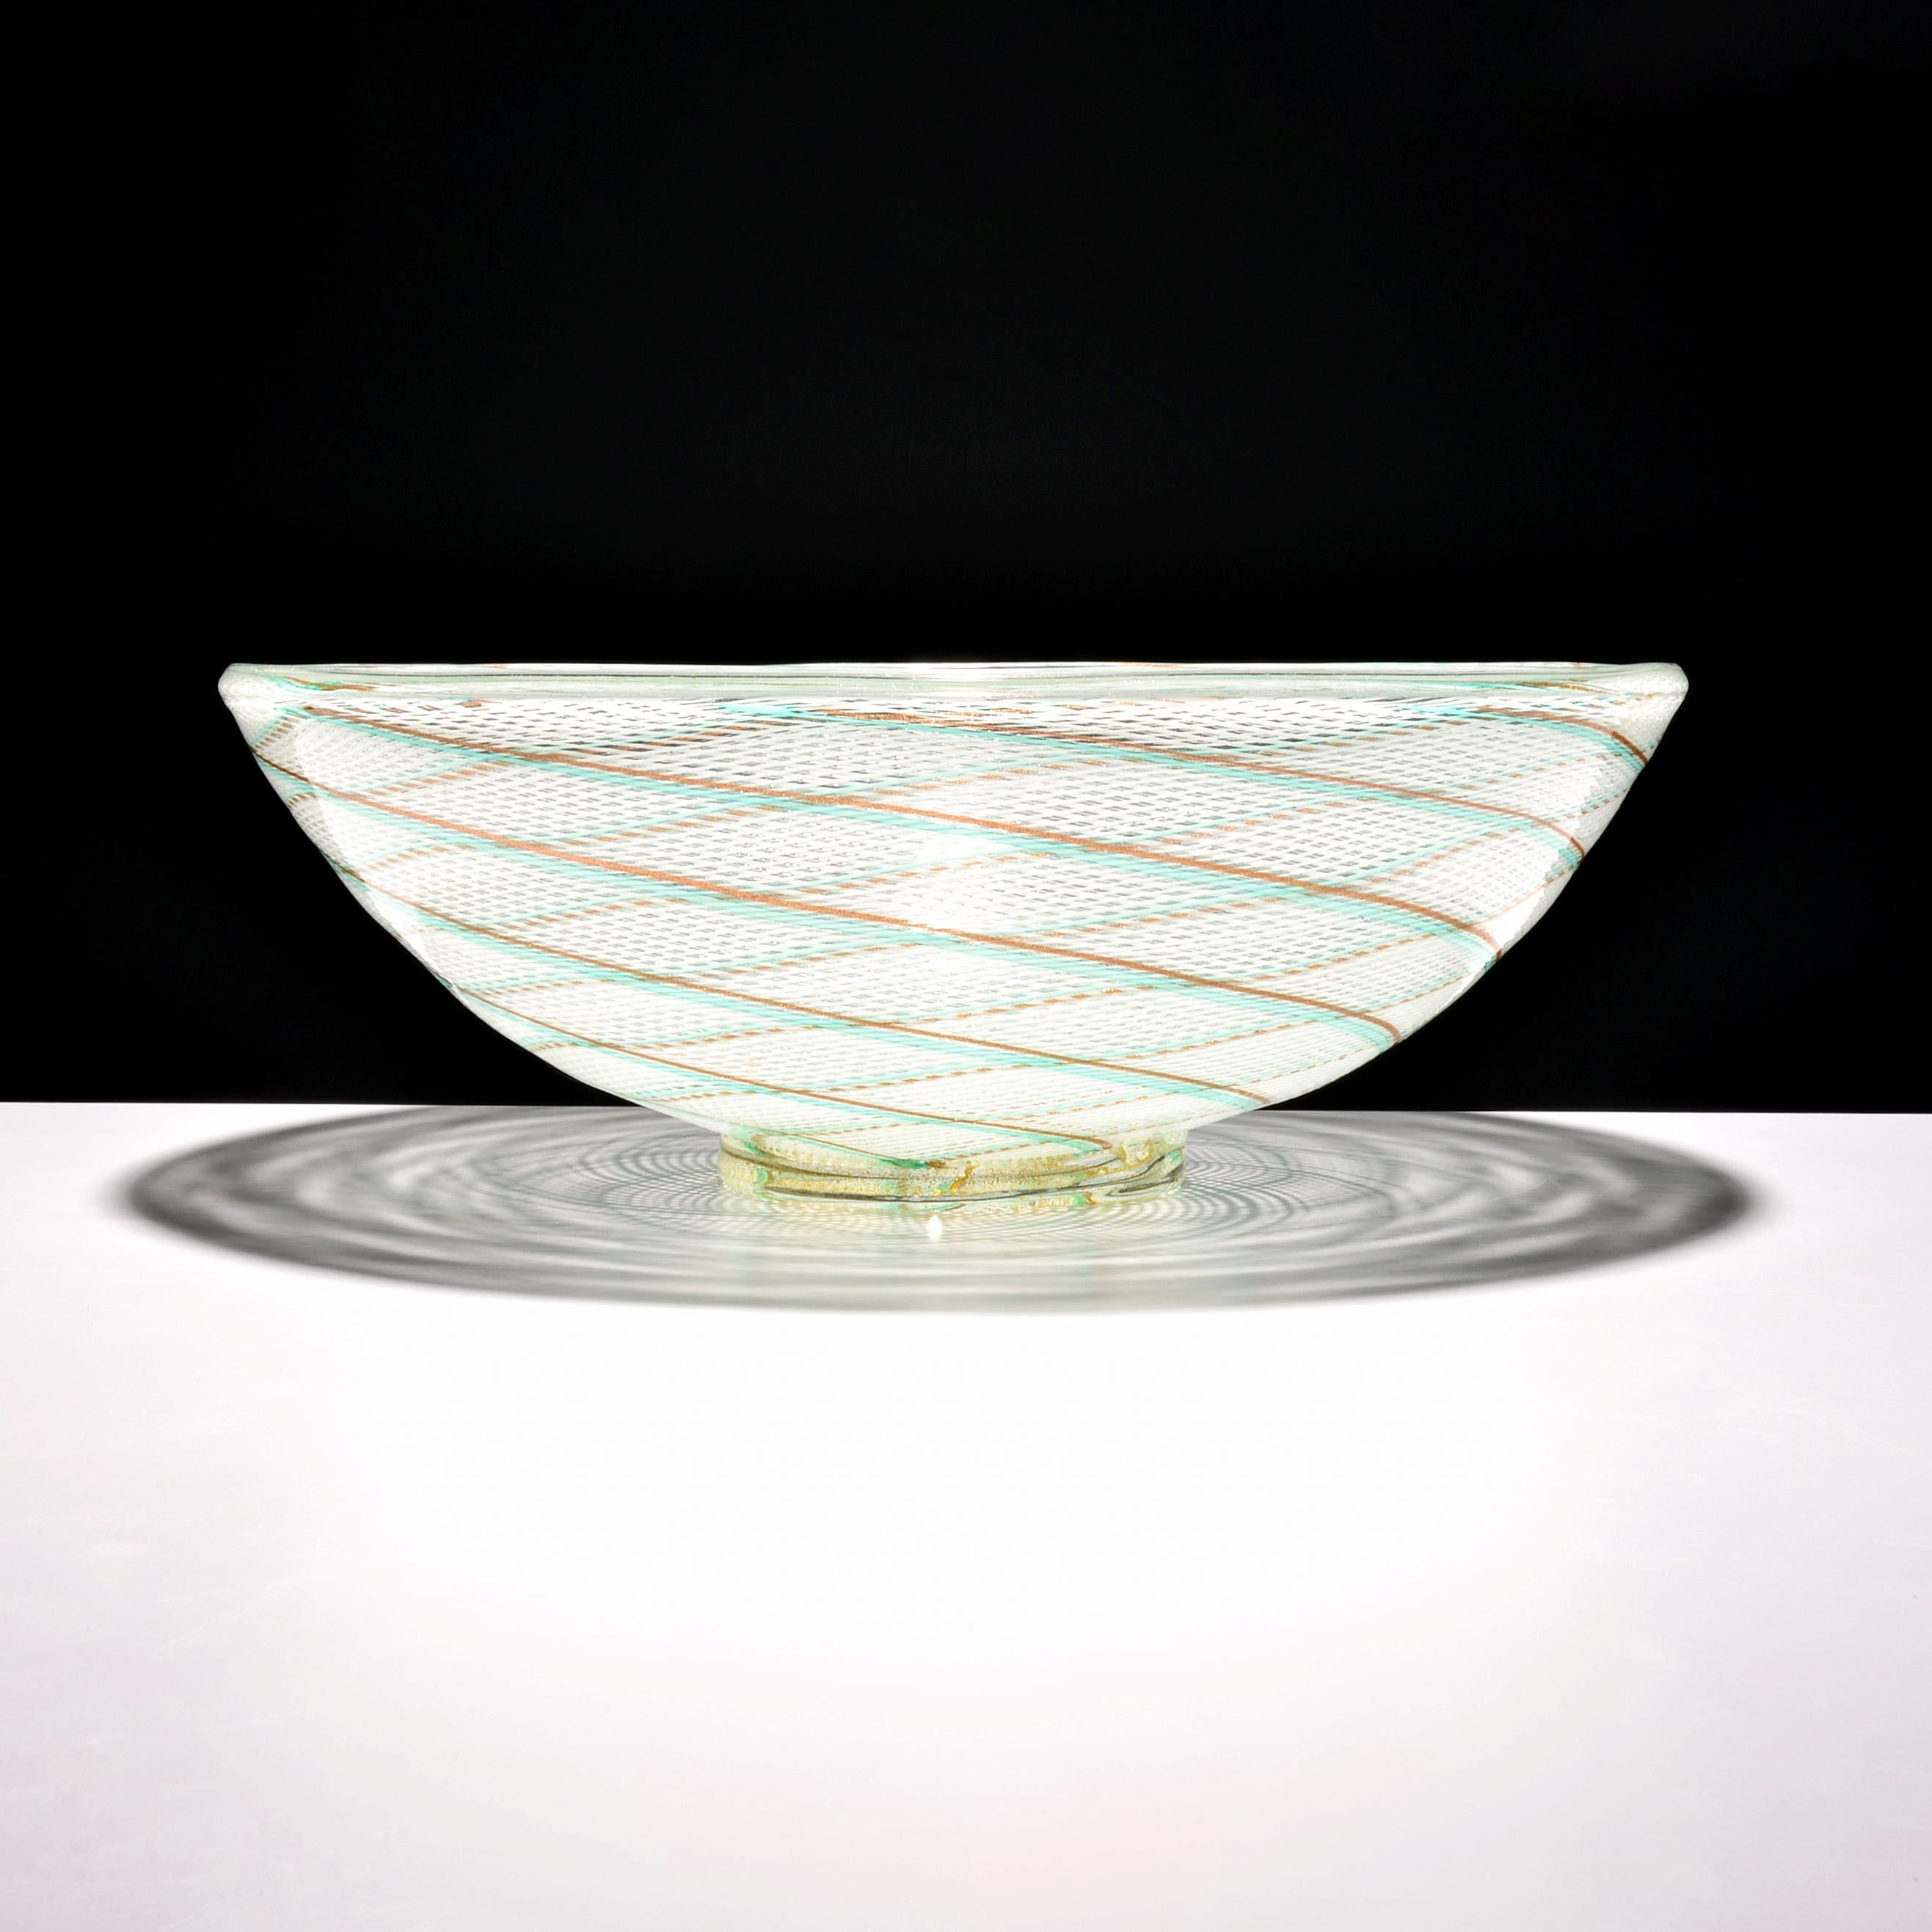 Artist/Designer: Dino Martens (Italian, 1894-1970)

Additional Information: Vessel has copper aventurine throughout.

Marking(s); notes: label

Country of origin; materials: Italy; glass

Dimensions: 6″h, 16″dia

Condition: good, no chips or cracks